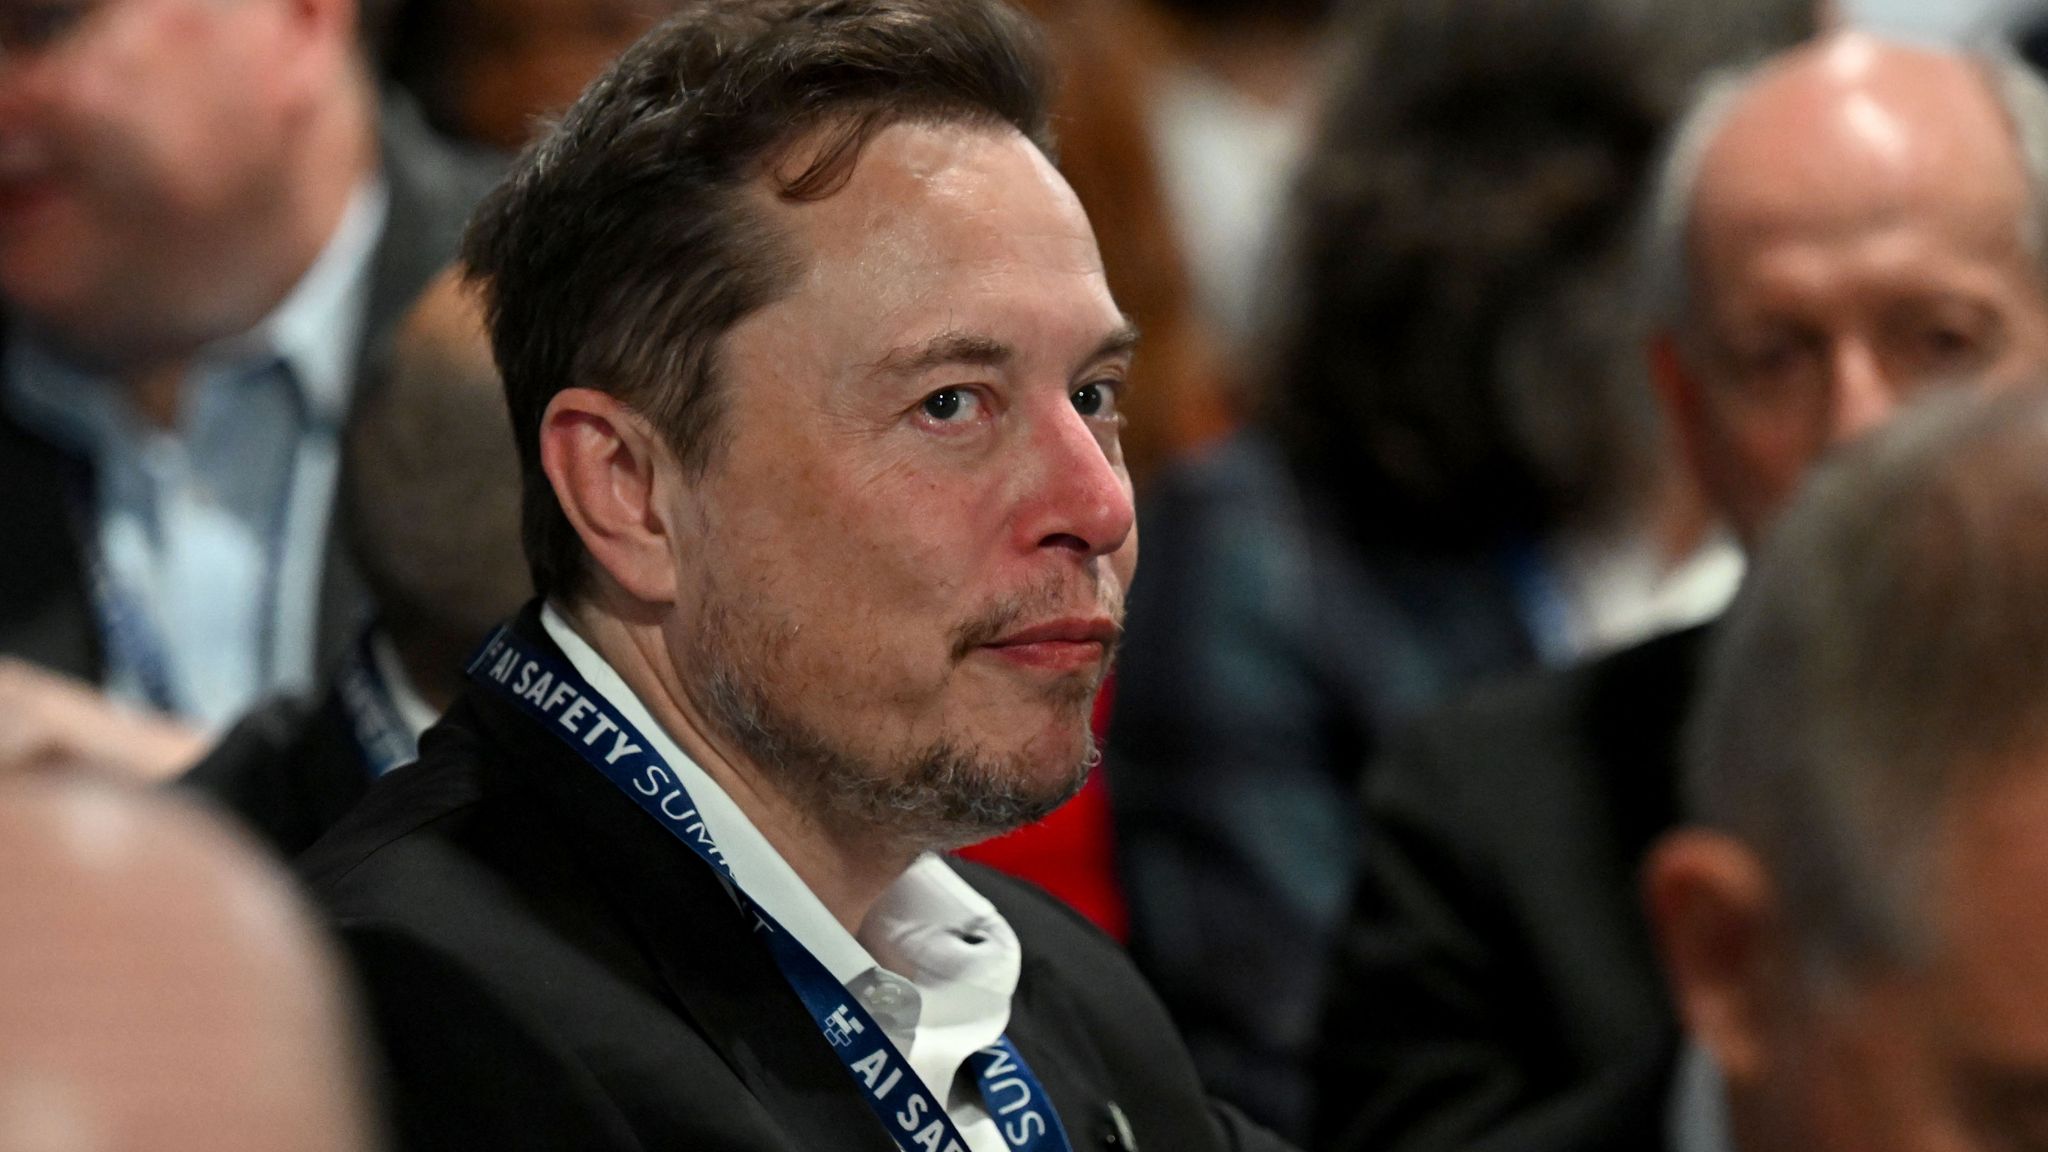 Elon Musk sues watchdog group after major companies pull ads | Science ...